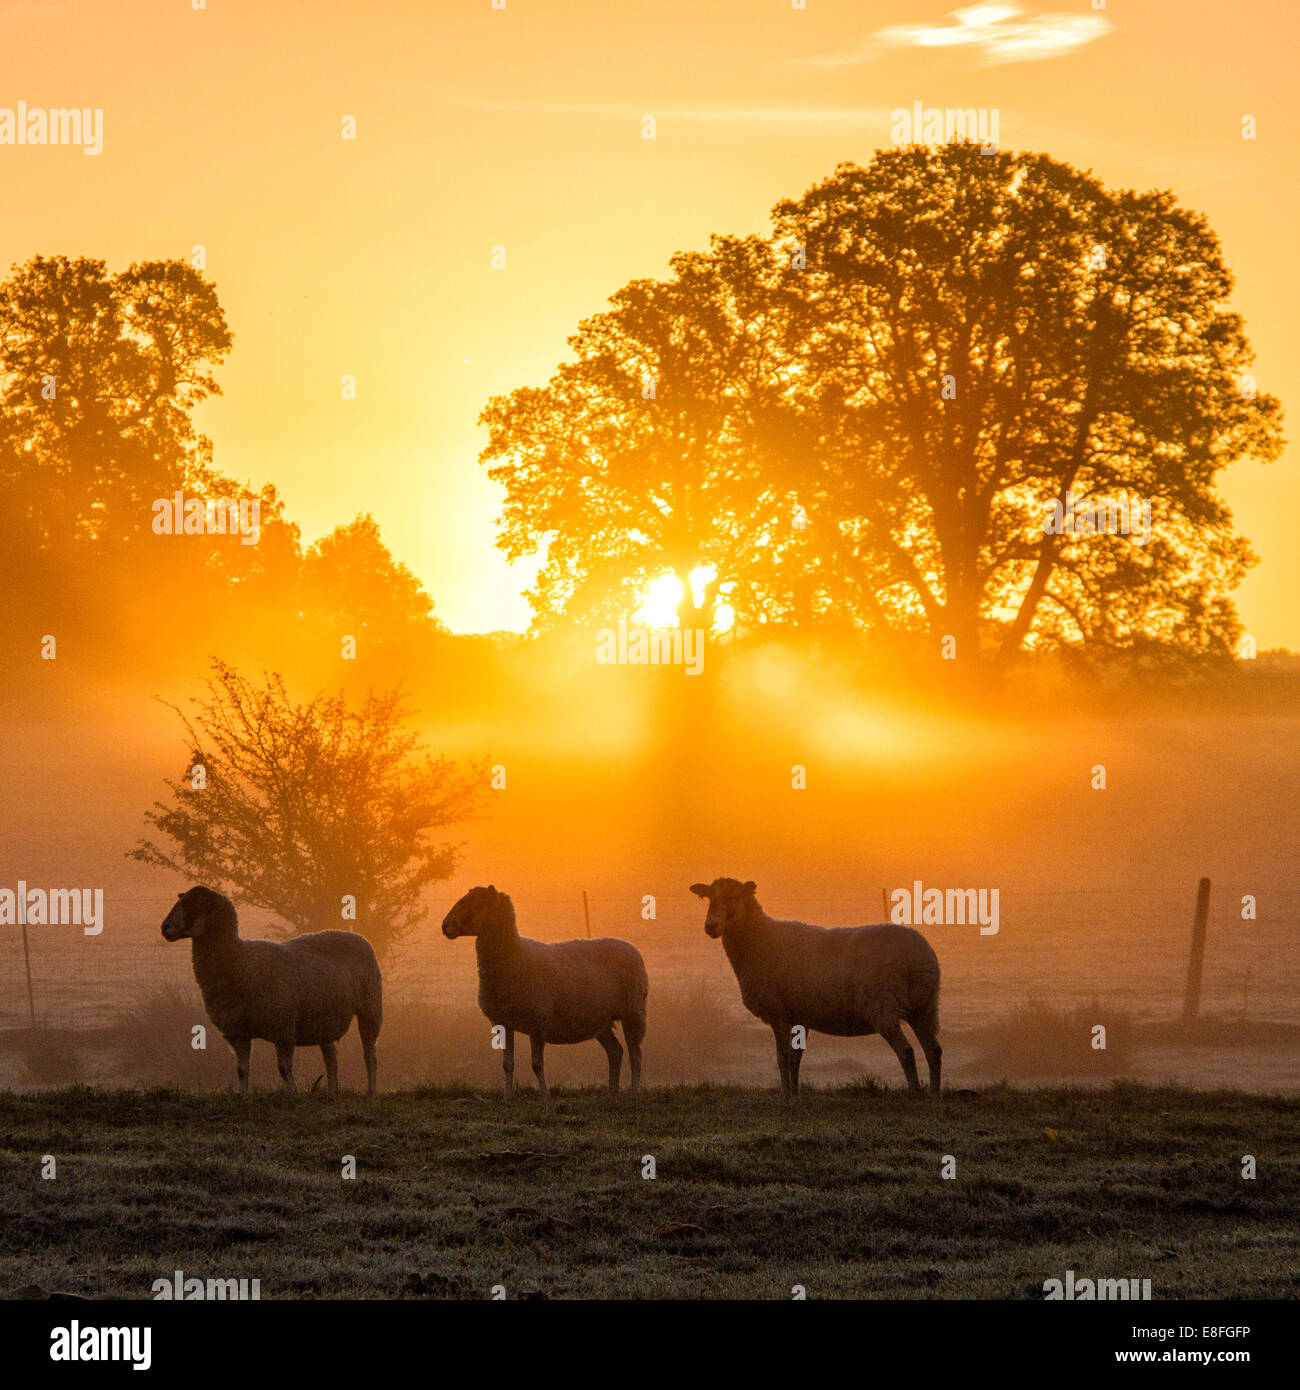 Sheep standing in field at sunset, Berkshire, England, United Kingdom Stock Photo